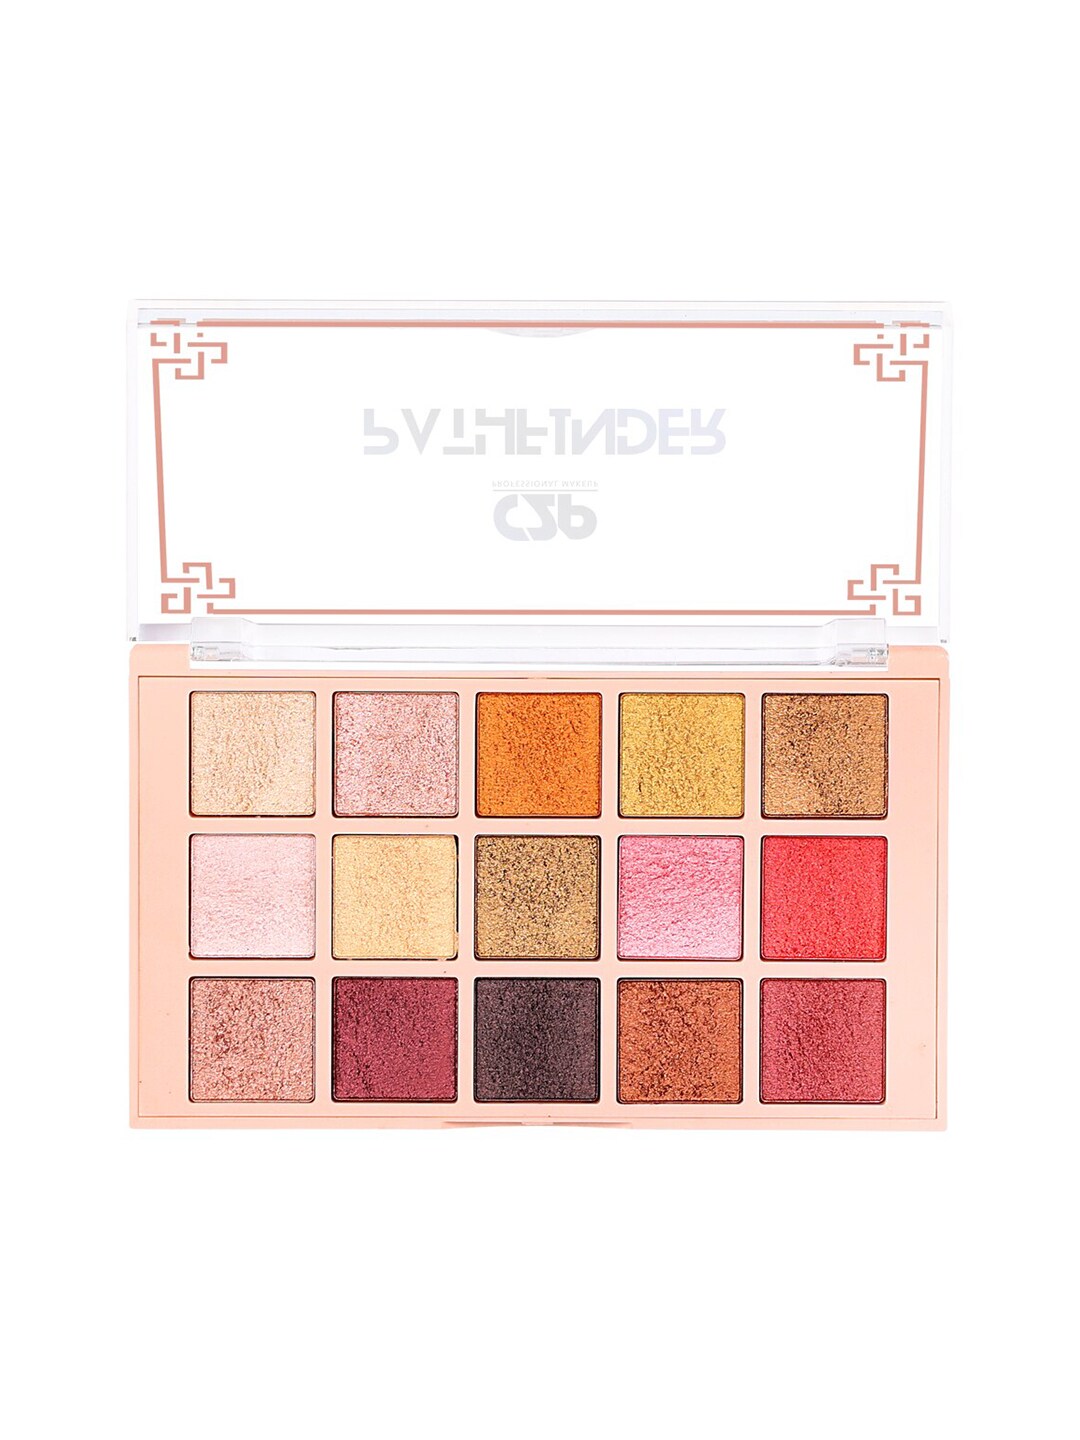 C2P PROFESSIONAL MAKEUP Pathfinder 15 Color Eyeshadow Palette - Turkish Delight 03 Price in India